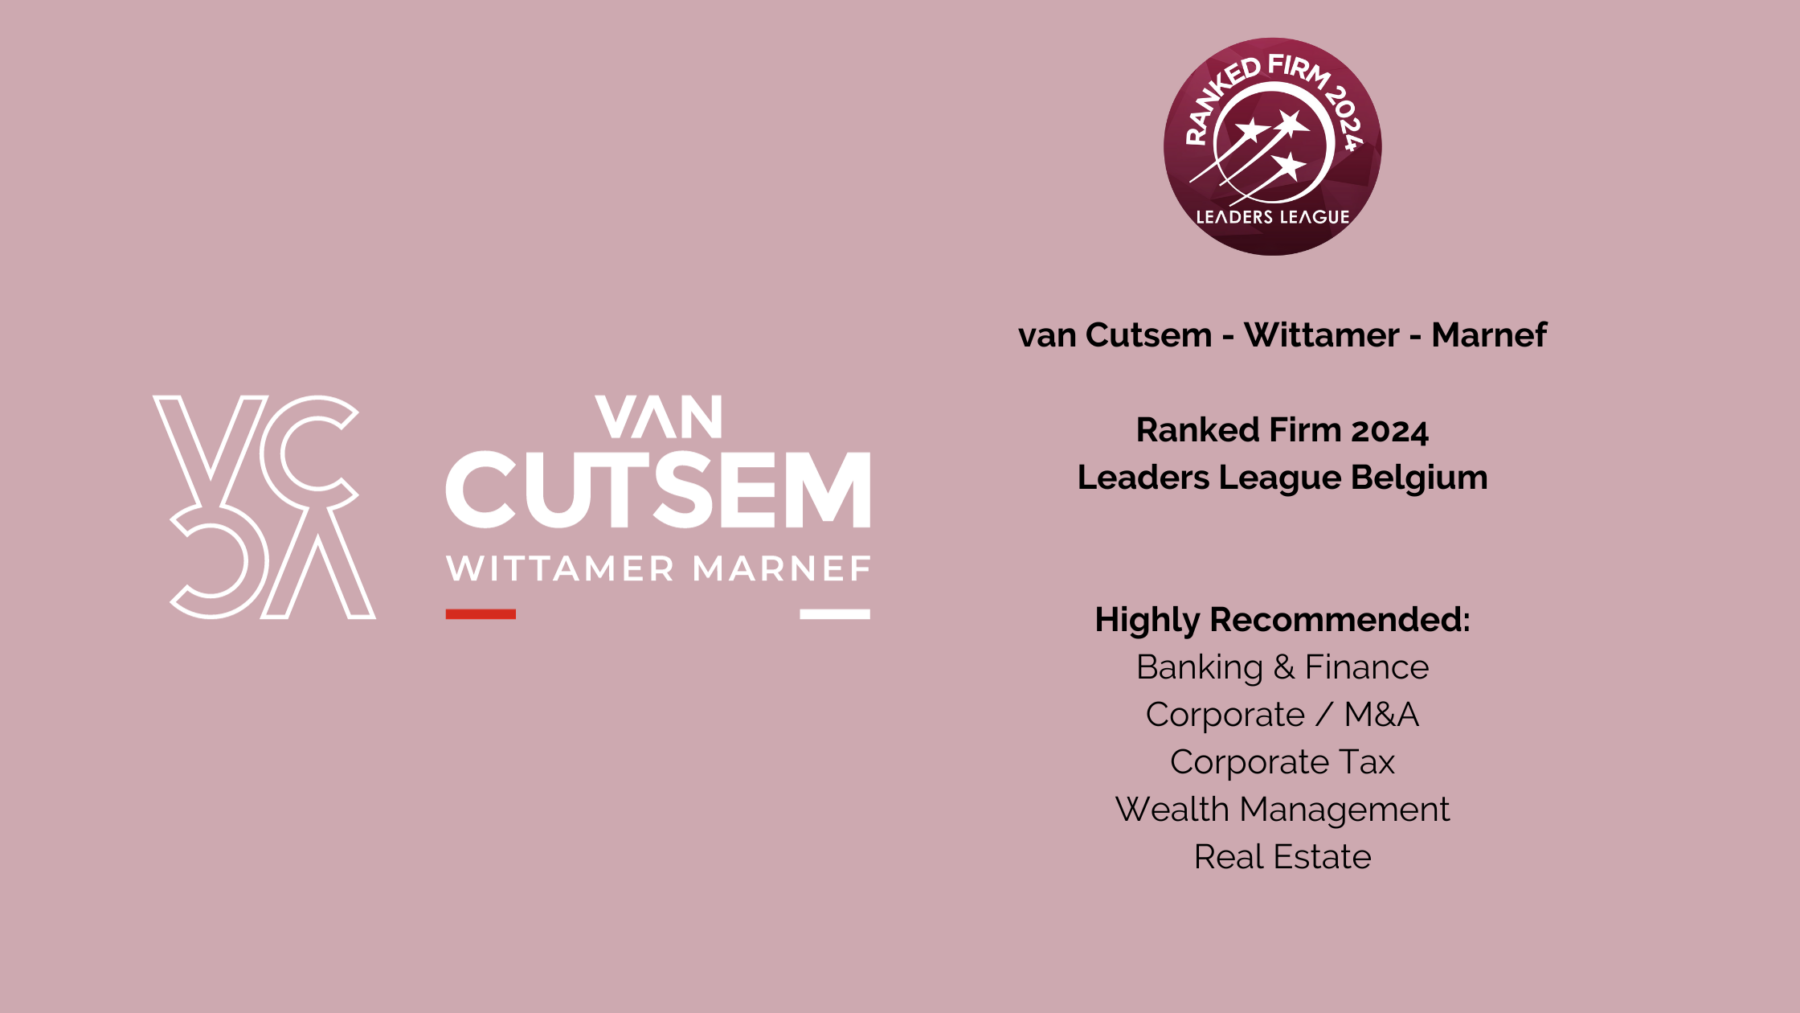 Our firm has been awarded in the latest 'Leaders League 2024' rankings of best law firms in Belgium